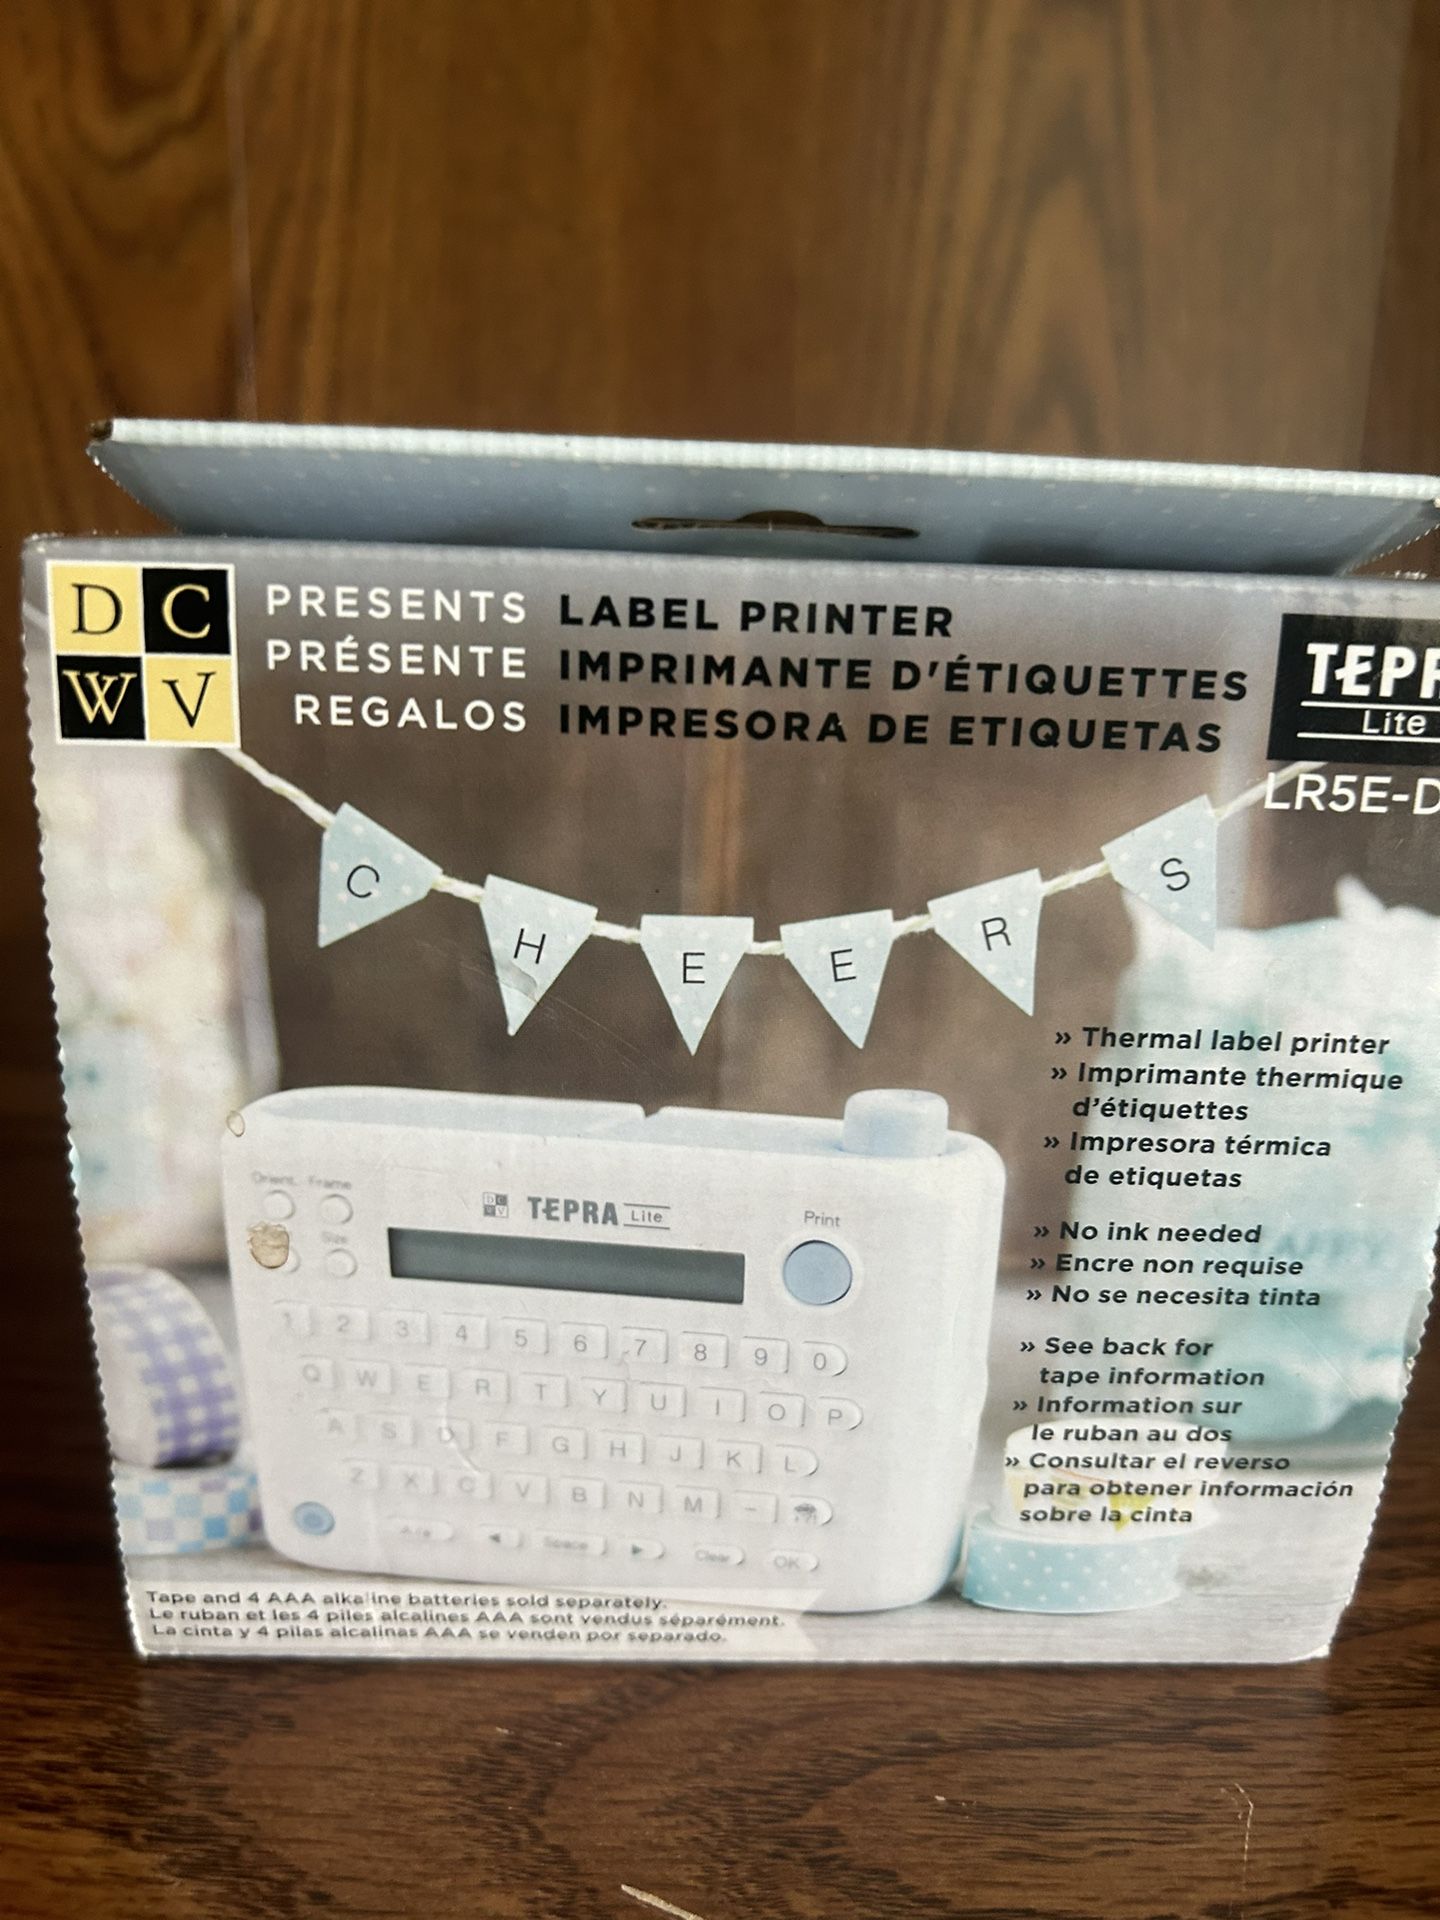 DCWV® TEPRA Lite Label Printer English Edition LR5E-DC1 NEW  All proceeds go towards my cancer treatment and research. Thank you and god bless